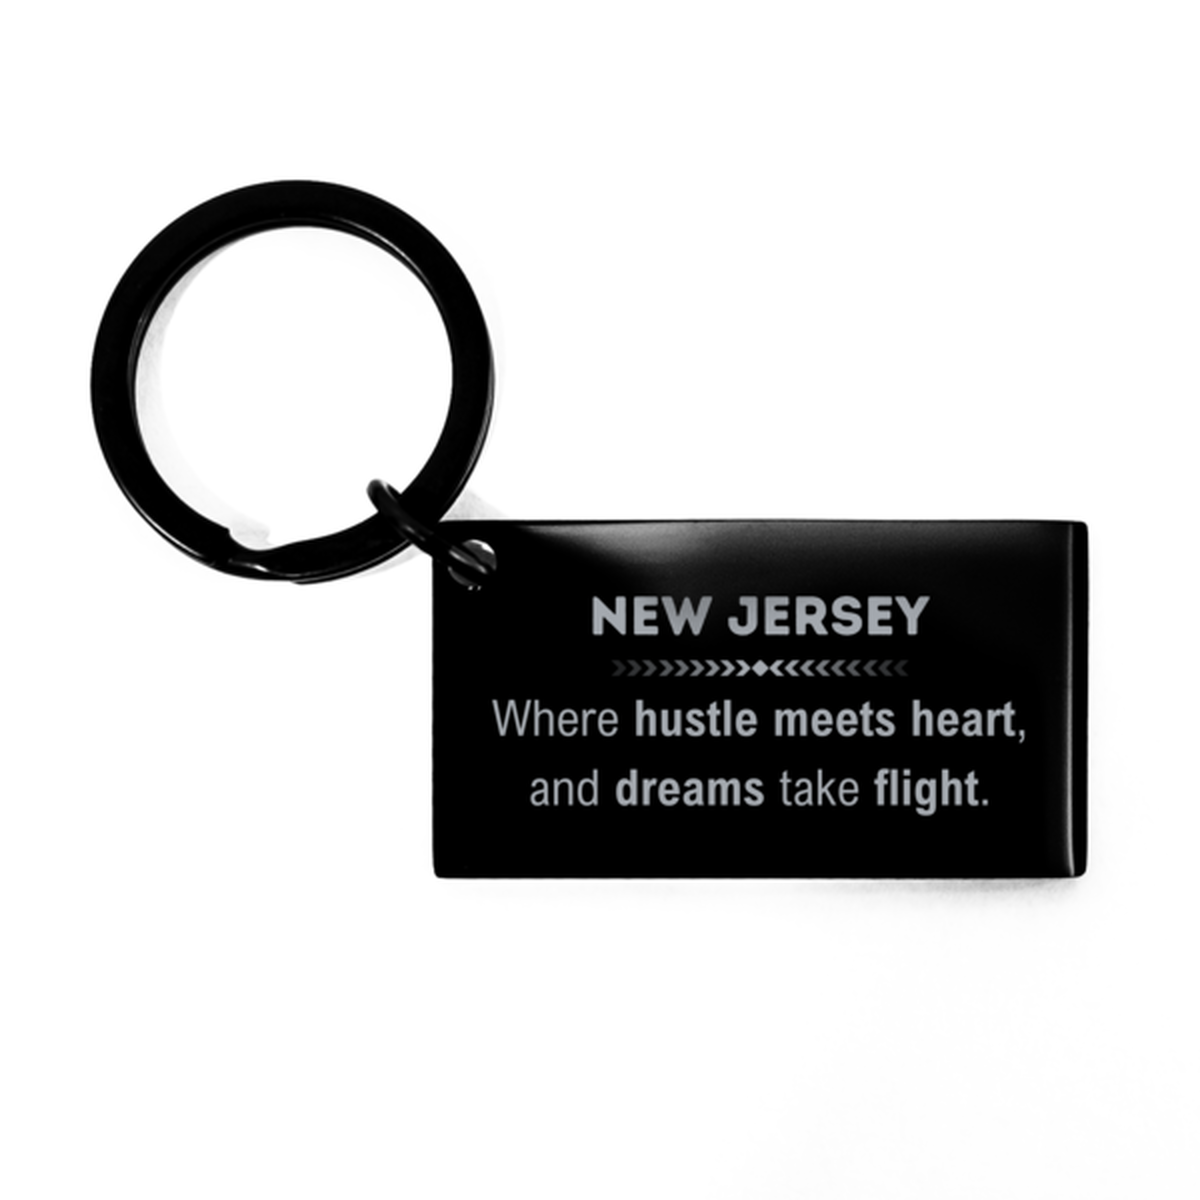 New Jersey: Where hustle meets heart, and dreams take flight, New Jersey Gifts, Proud New Jersey Christmas Birthday New Jersey Keychain, New Jersey State People, Men, Women, Friends